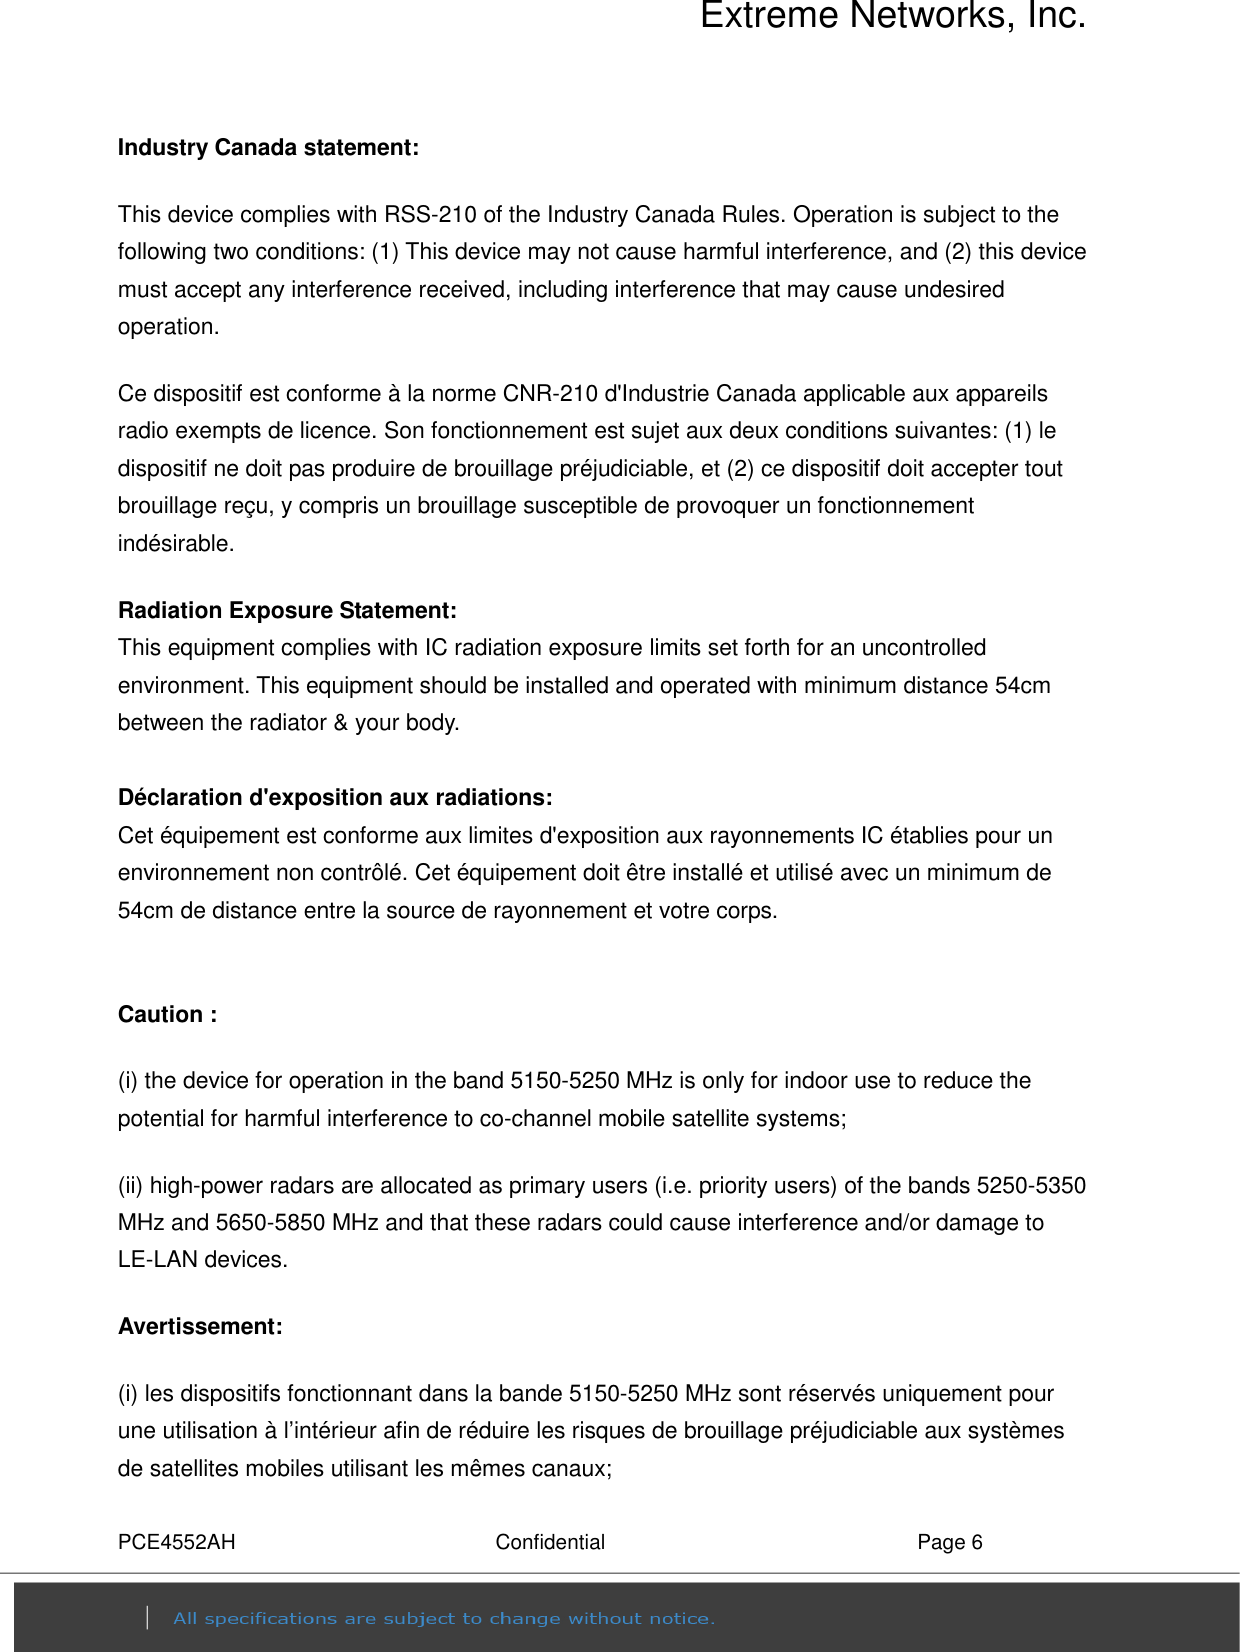 Extreme Networks, Inc. PCE4552AH  Confidential  Page 6 Industry Canada statement: This device complies with RSS-210 of the Industry Canada Rules. Operation is subject to the following two conditions: (1) This device may not cause harmful interference, and (2) this device must accept any interference received, including interference that may cause undesired operation. Ce dispositif est conforme à la norme CNR-210 d&apos;Industrie Canada applicable aux appareils radio exempts de licence. Son fonctionnement est sujet aux deux conditions suivantes: (1) le dispositif ne doit pas produire de brouillage préjudiciable, et (2) ce dispositif doit accepter tout brouillage reçu, y compris un brouillage susceptible de provoquer un fonctionnement indésirable.   Radiation Exposure Statement: This equipment complies with IC radiation exposure limits set forth for an uncontrolled environment. This equipment should be installed and operated with minimum distance 54cm between the radiator &amp; your body.  Déclaration d&apos;exposition aux radiations: Cet équipement est conforme aux limites d&apos;exposition aux rayonnements IC établies pour un environnement non contrôlé. Cet équipement doit être installé et utilisé avec un minimum de 54cm de distance entre la source de rayonnement et votre corps.  Caution : (i) the device for operation in the band 5150-5250 MHz is only for indoor use to reduce the potential for harmful interference to co-channel mobile satellite systems; (ii) high-power radars are allocated as primary users (i.e. priority users) of the bands 5250-5350 MHz and 5650-5850 MHz and that these radars could cause interference and/or damage to LE-LAN devices. Avertissement: (i) les dispositifs fonctionnant dans la bande 5150-5250 MHz sont réservés uniquement pour une utilisation à l’intérieur afin de réduire les risques de brouillage préjudiciable aux systèmes de satellites mobiles utilisant les mêmes canaux; 